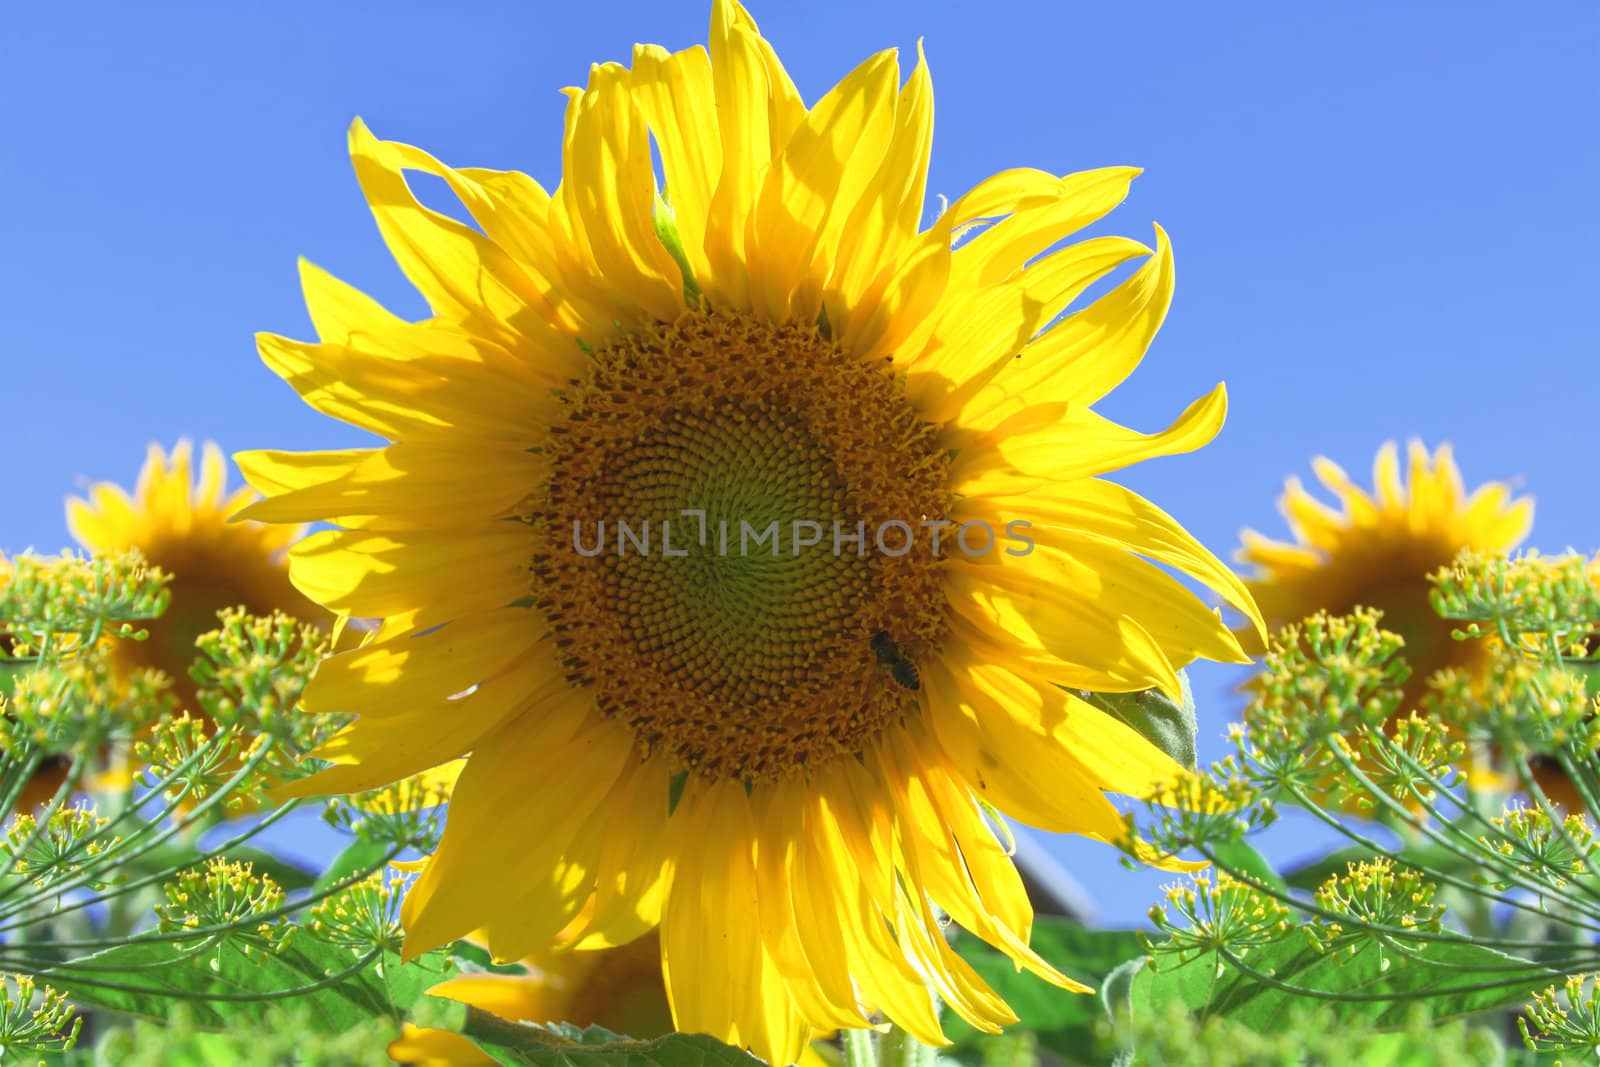 Yellow sunflower against the blue sky